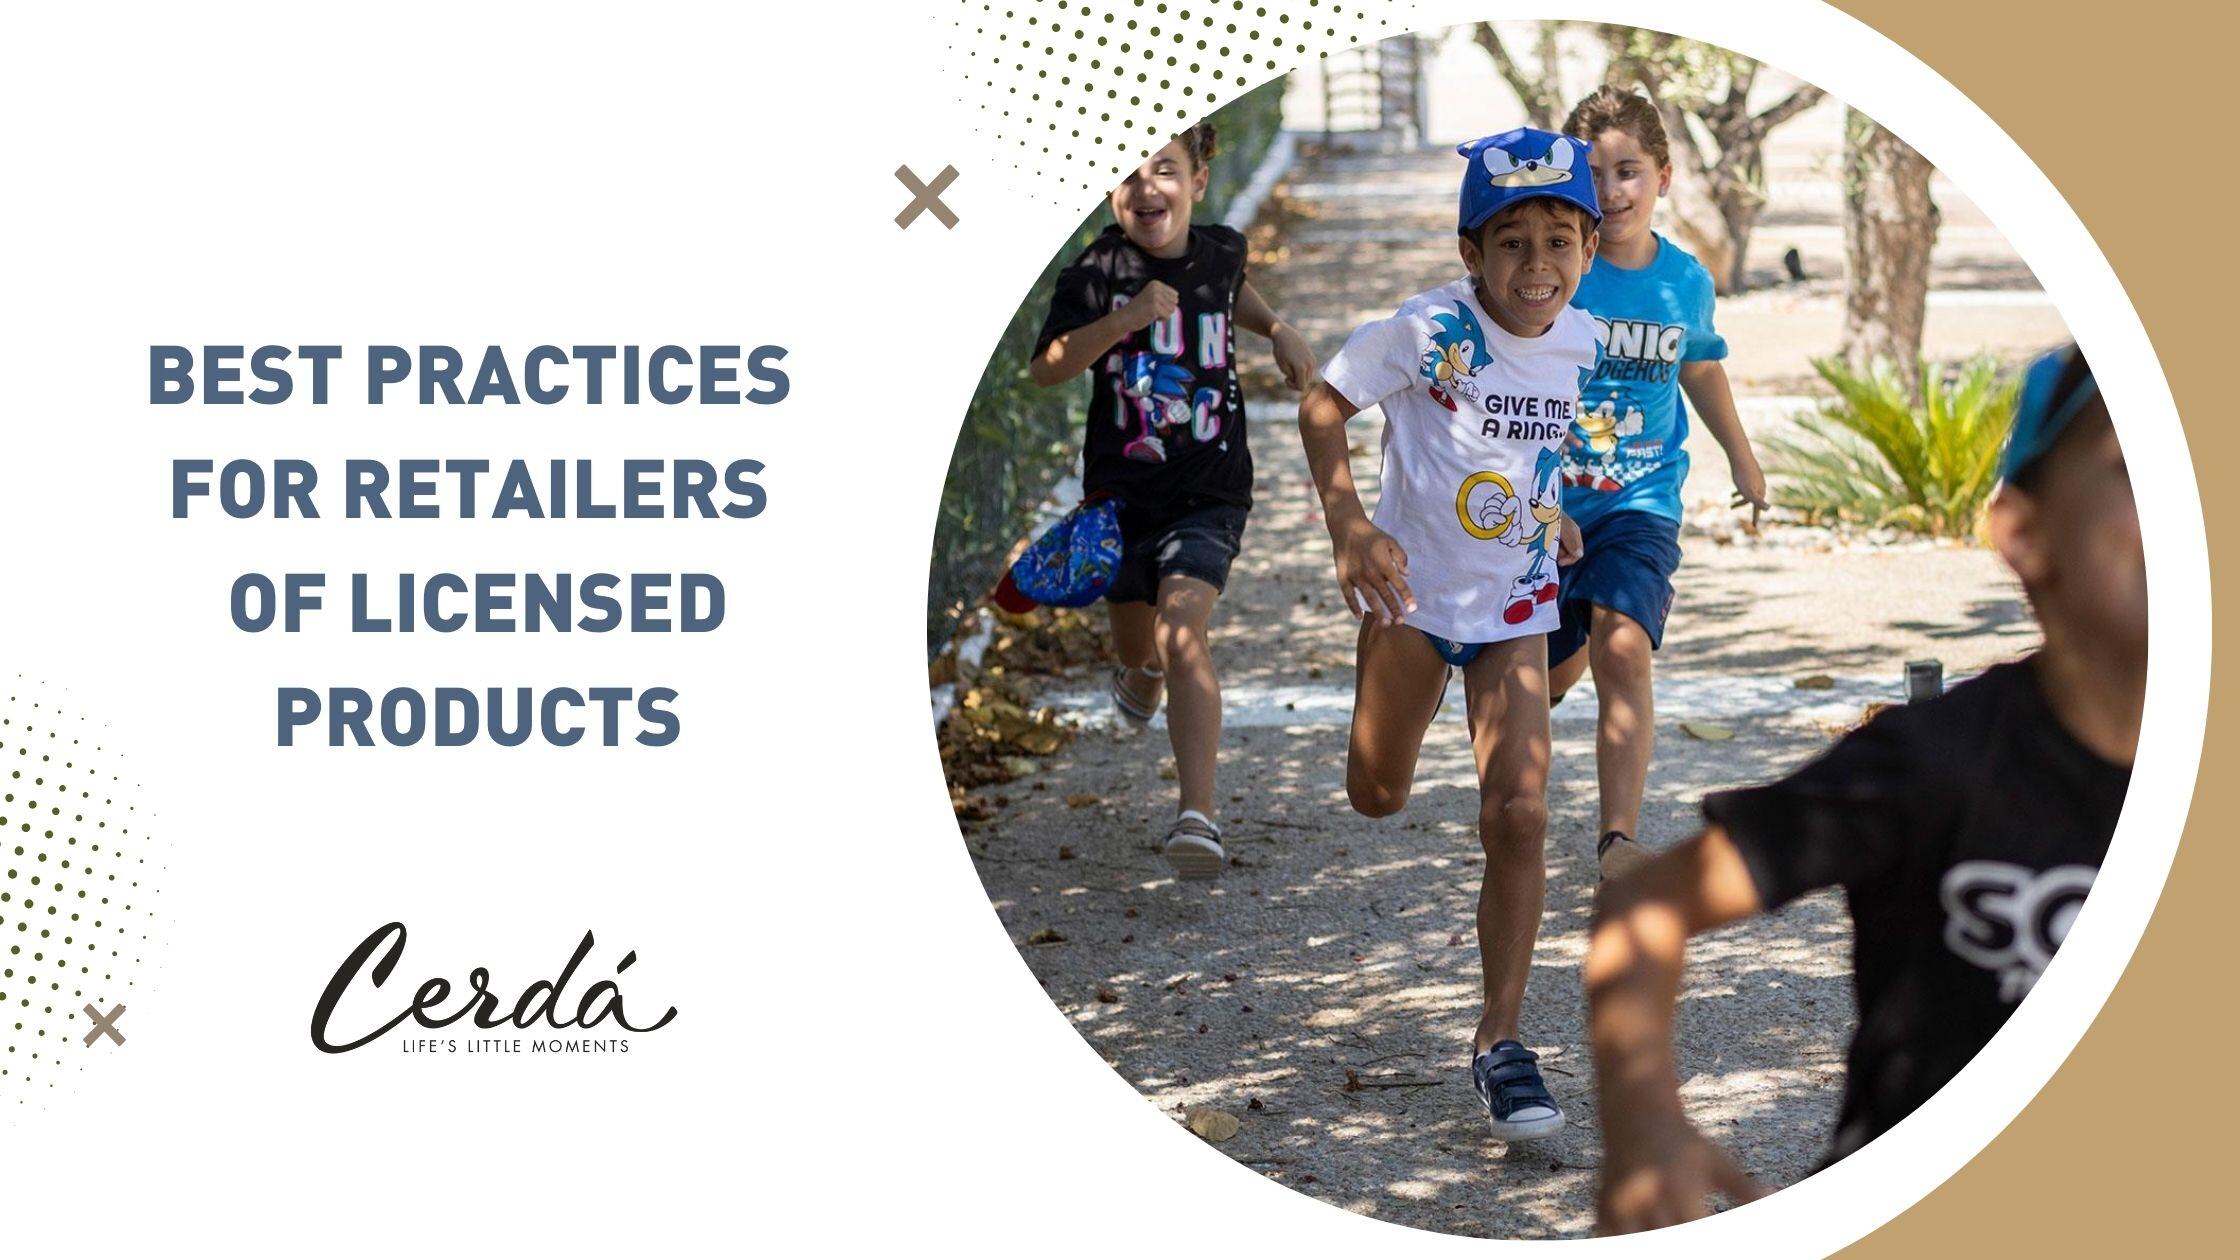 Dominate the market with best practices for retailers of licensed products